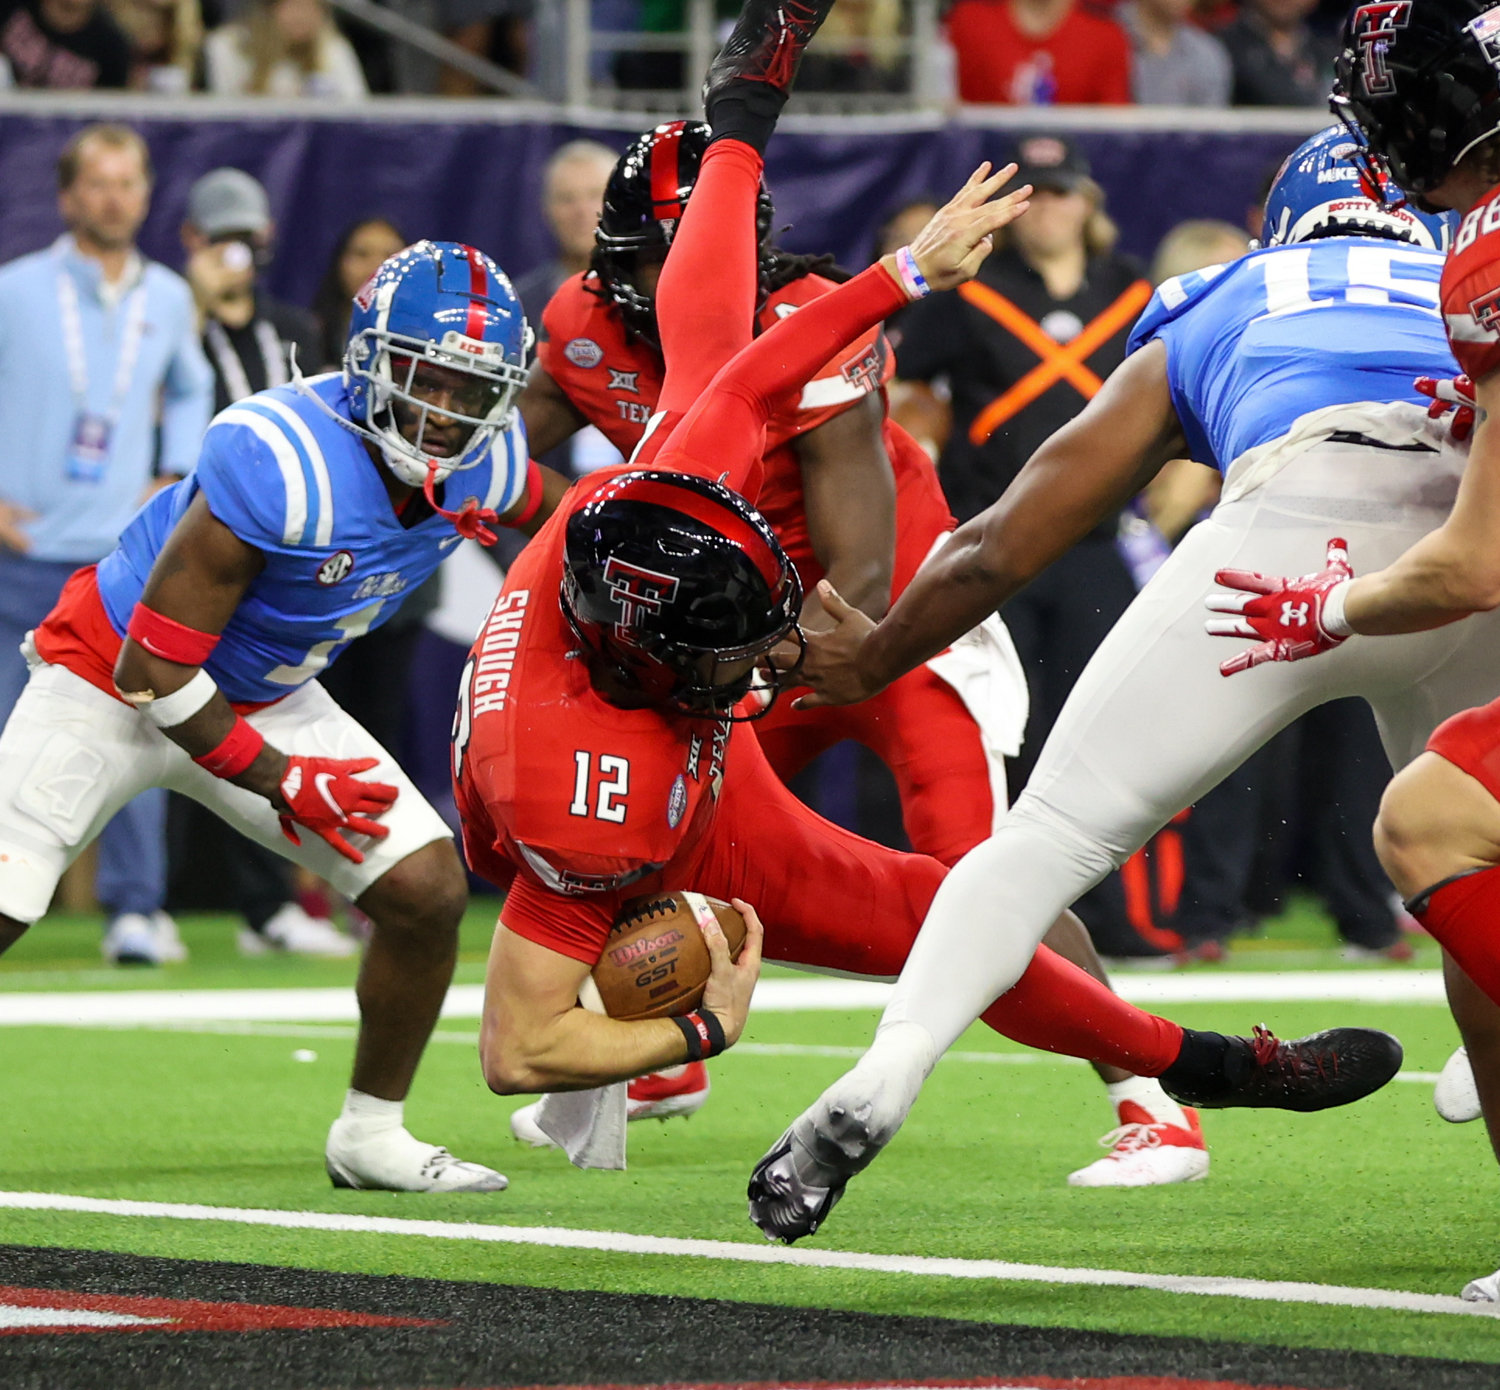 Texas Tech quarterback Tyler Shough (12) dives into the end zone for a rushing touchdown during the TaxAct Texas Bowl on Dec. 28, 2022 in Houston.